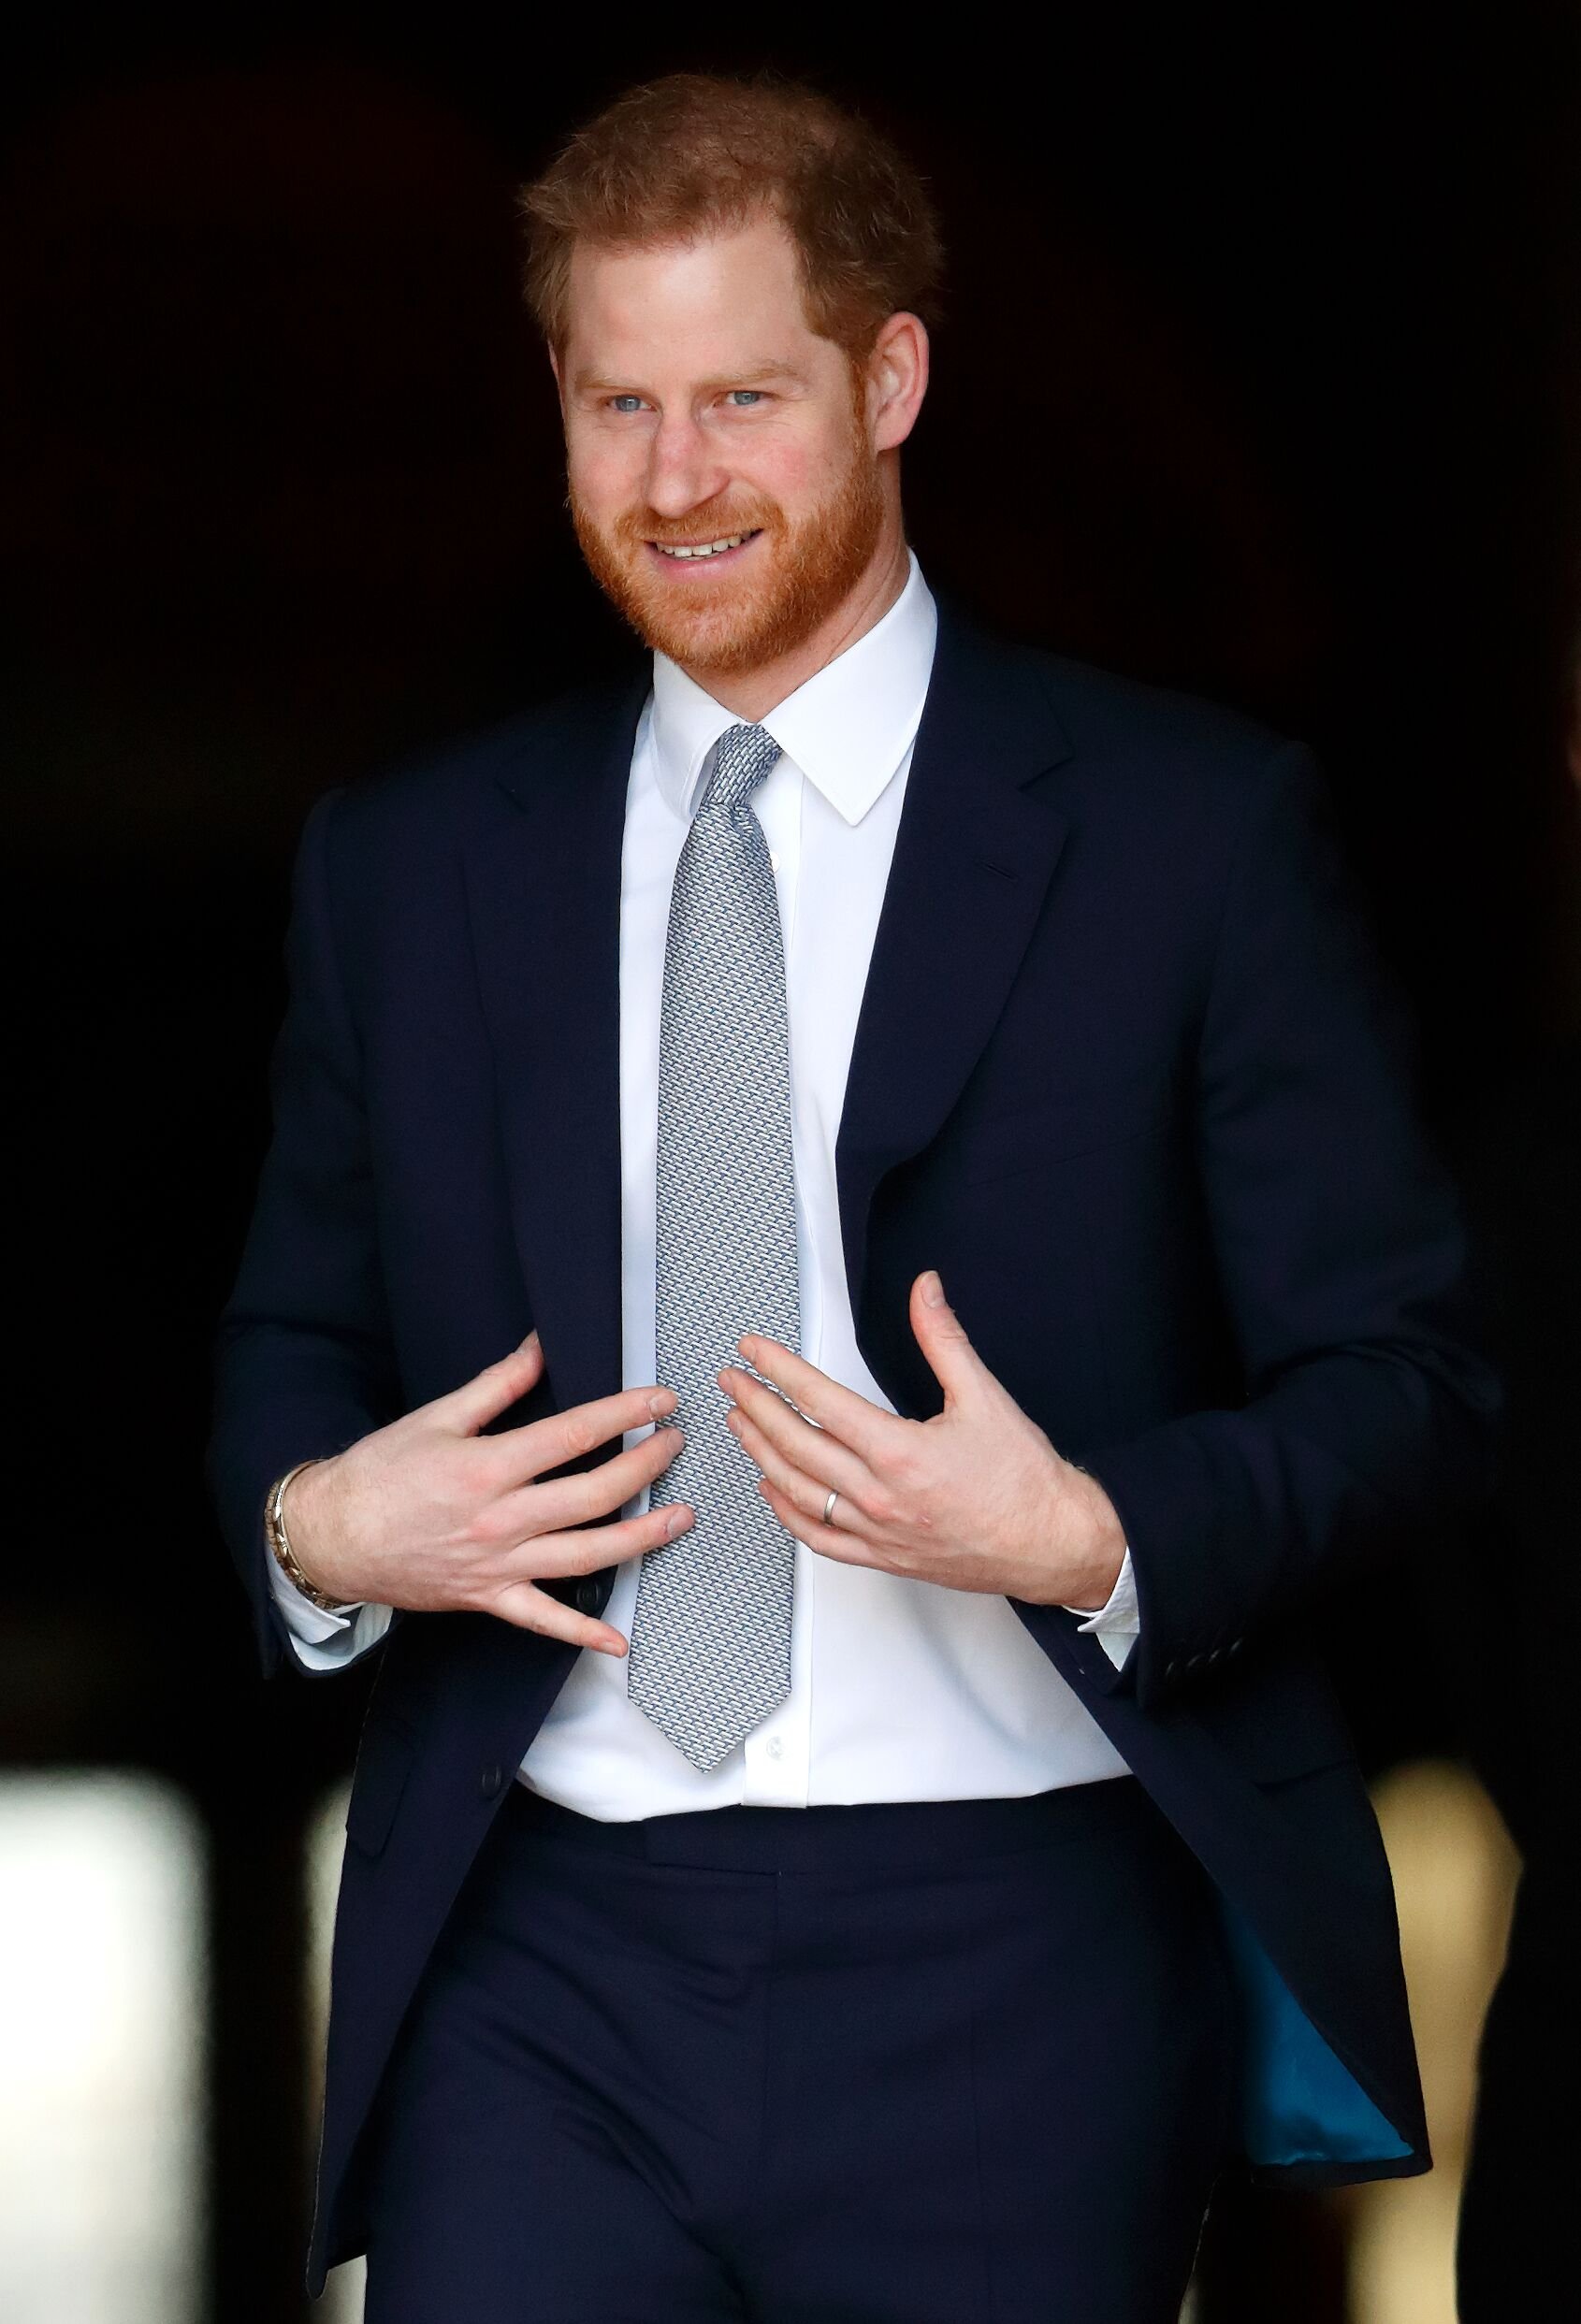  Prince Harry hosts the Rugby League World Cup 2021 draws for the men's, women's and wheelchair tournaments at Buckingham Palace on January 16, 2020 in London, England. | Source: Getty Images